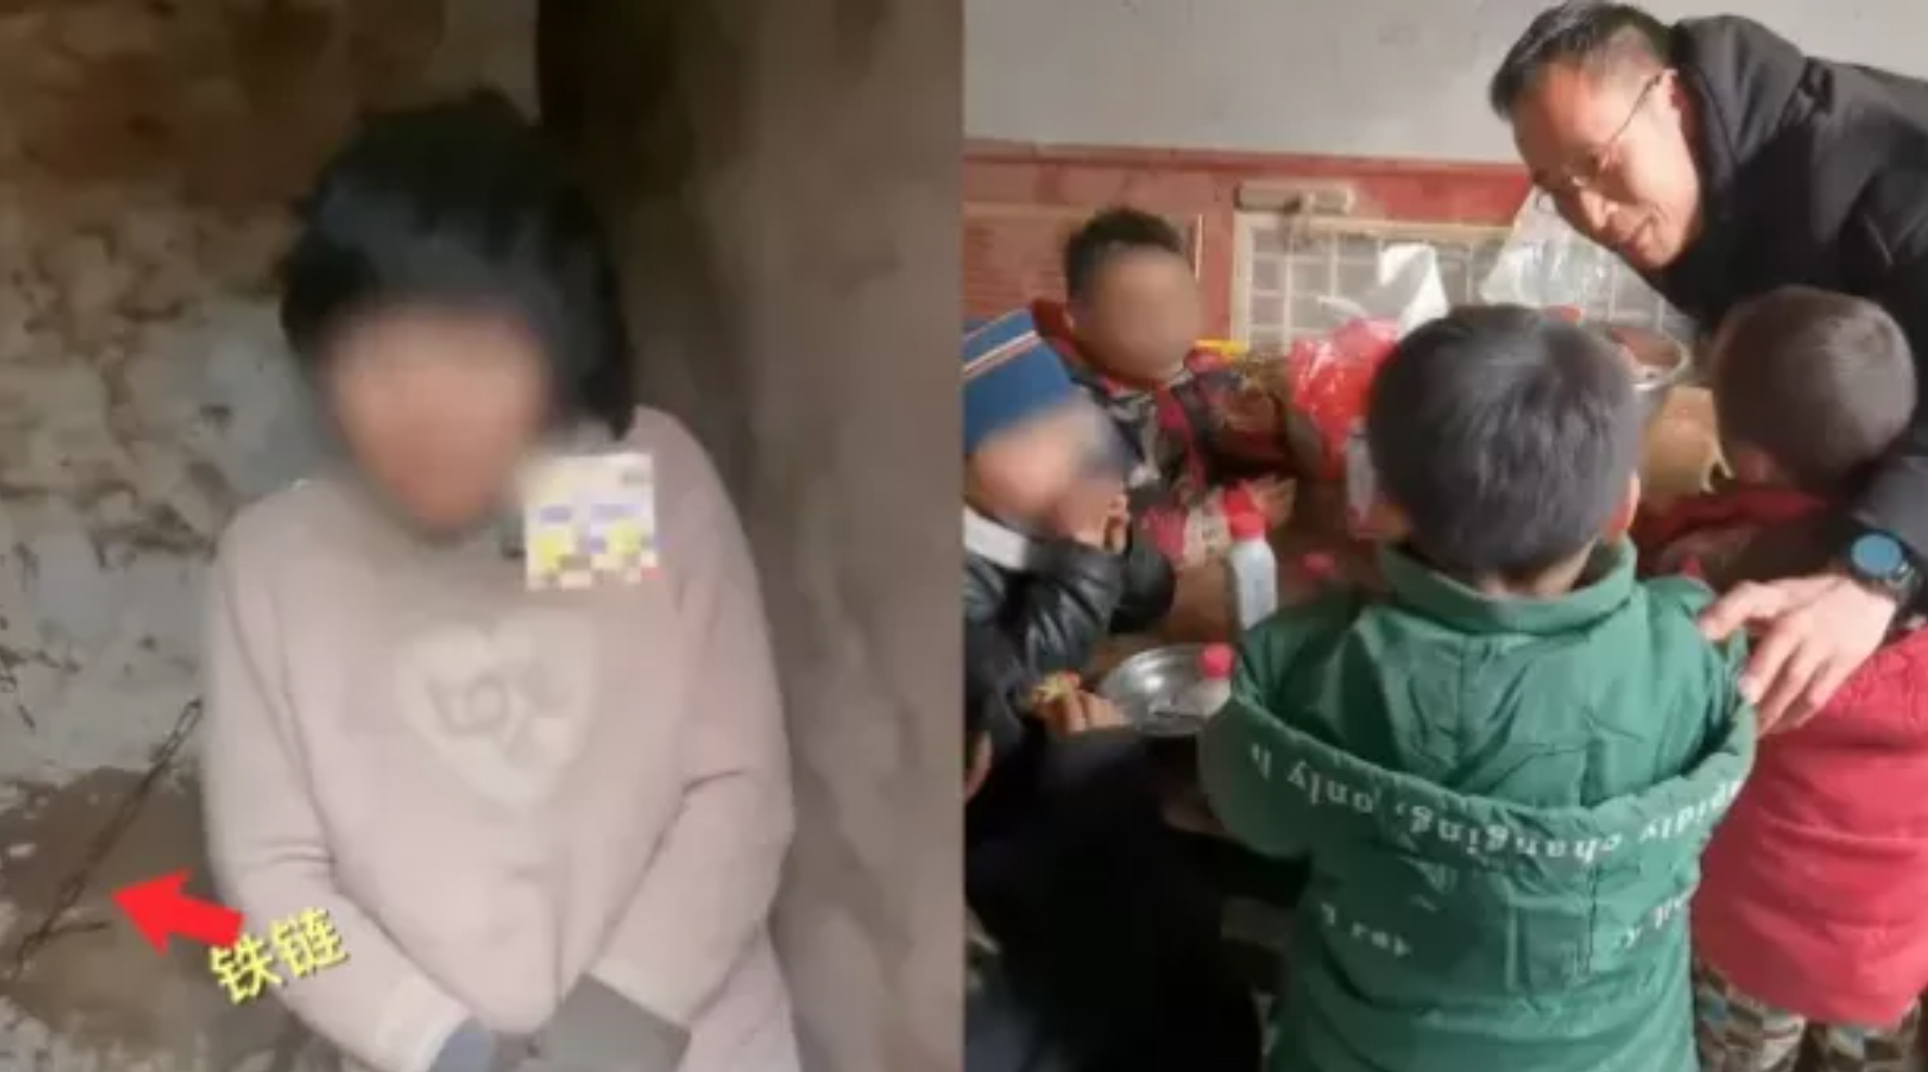 Disturbing video of chained-up mother in rural China sparks outrage, calls for investigation pic